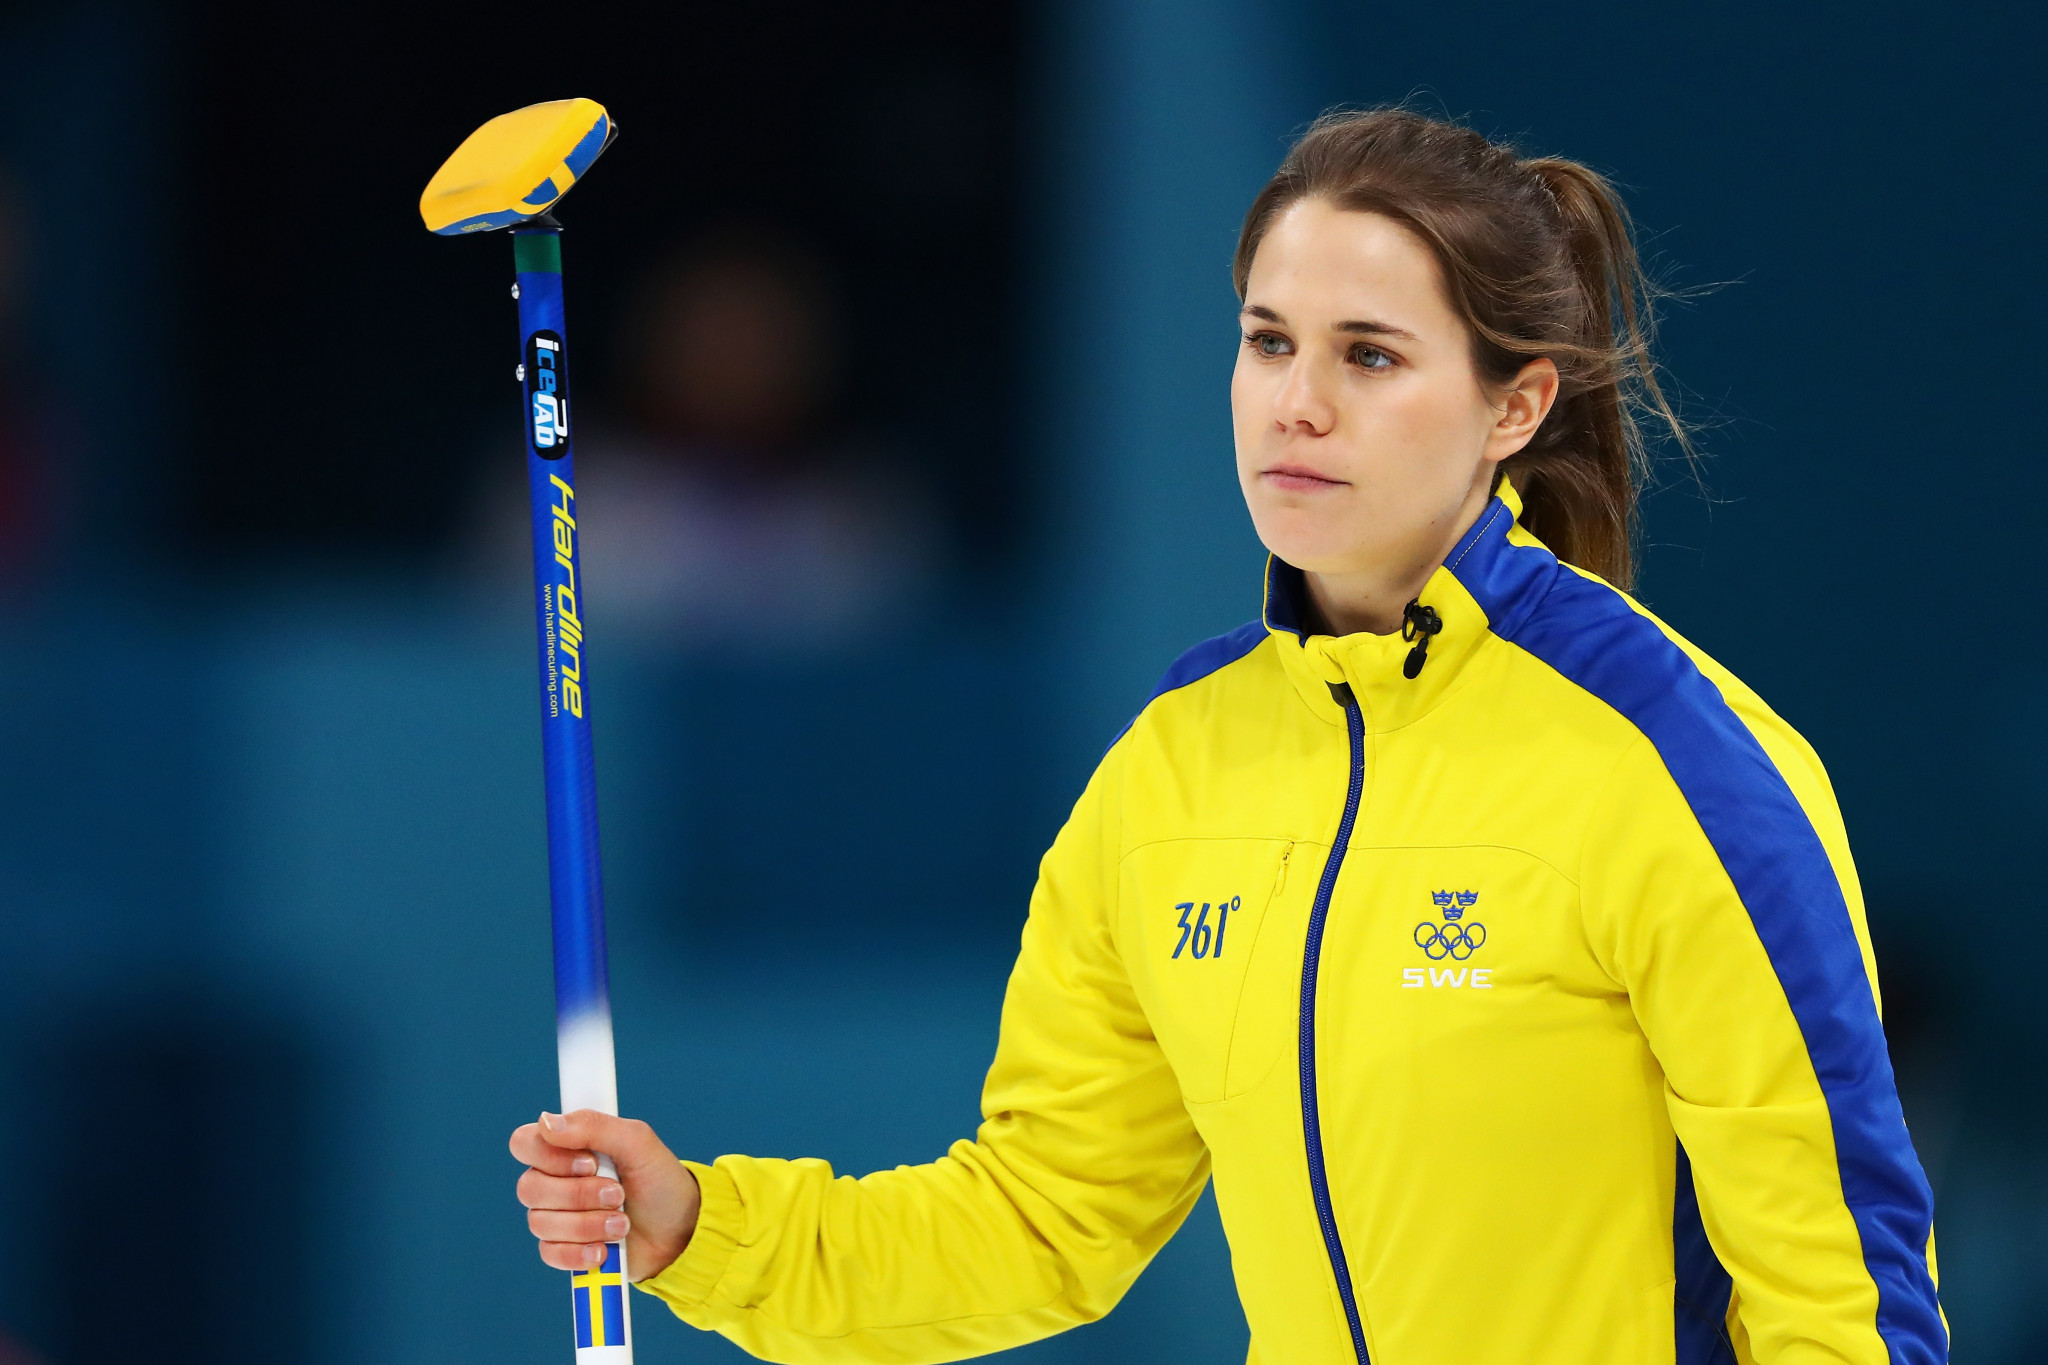 Transitioning Sweden and Scotland eye gold at European Curling Championships